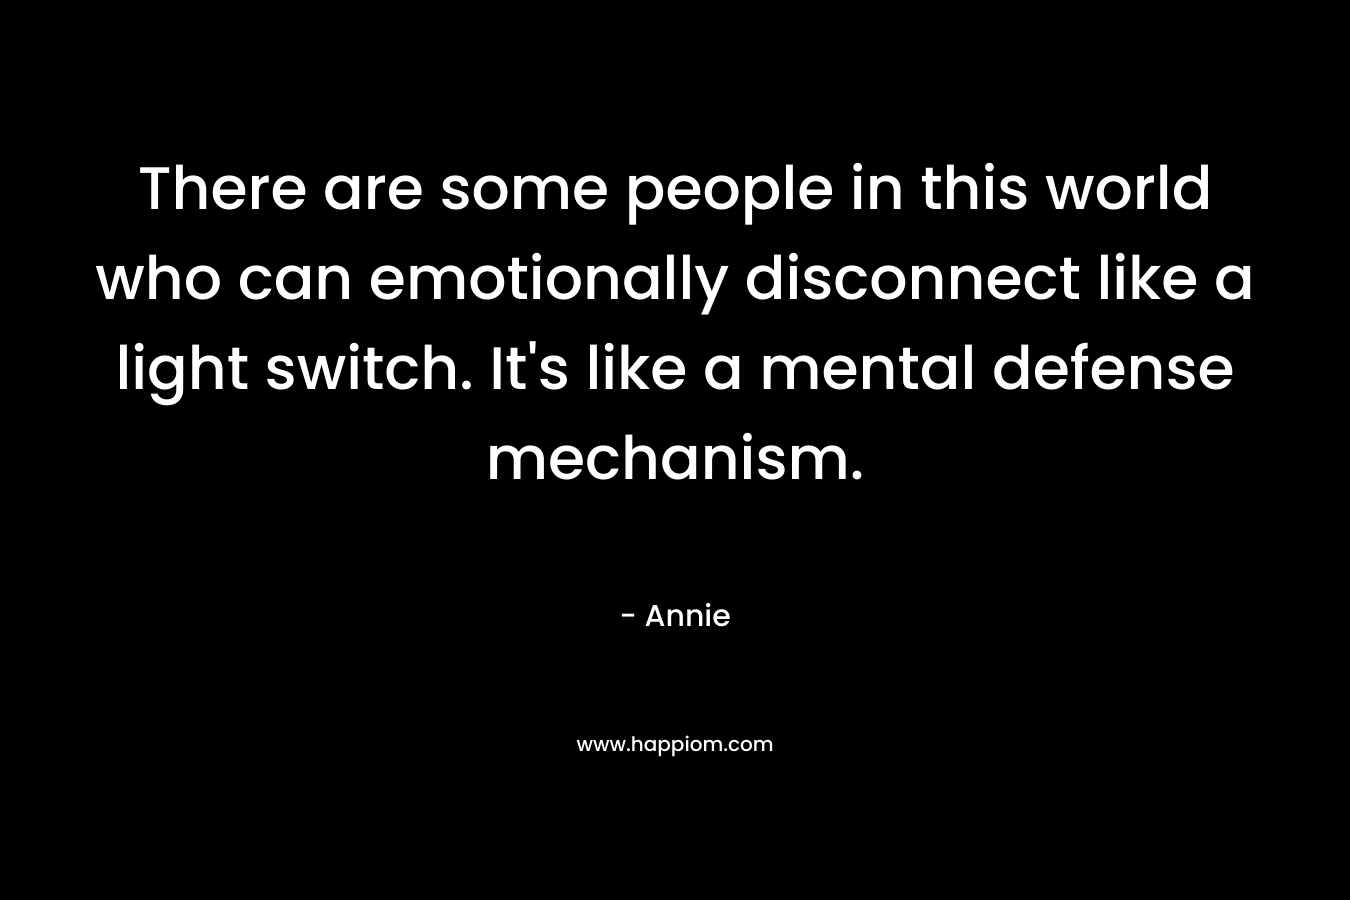 There are some people in this world who can emotionally disconnect like a light switch. It's like a mental defense mechanism.